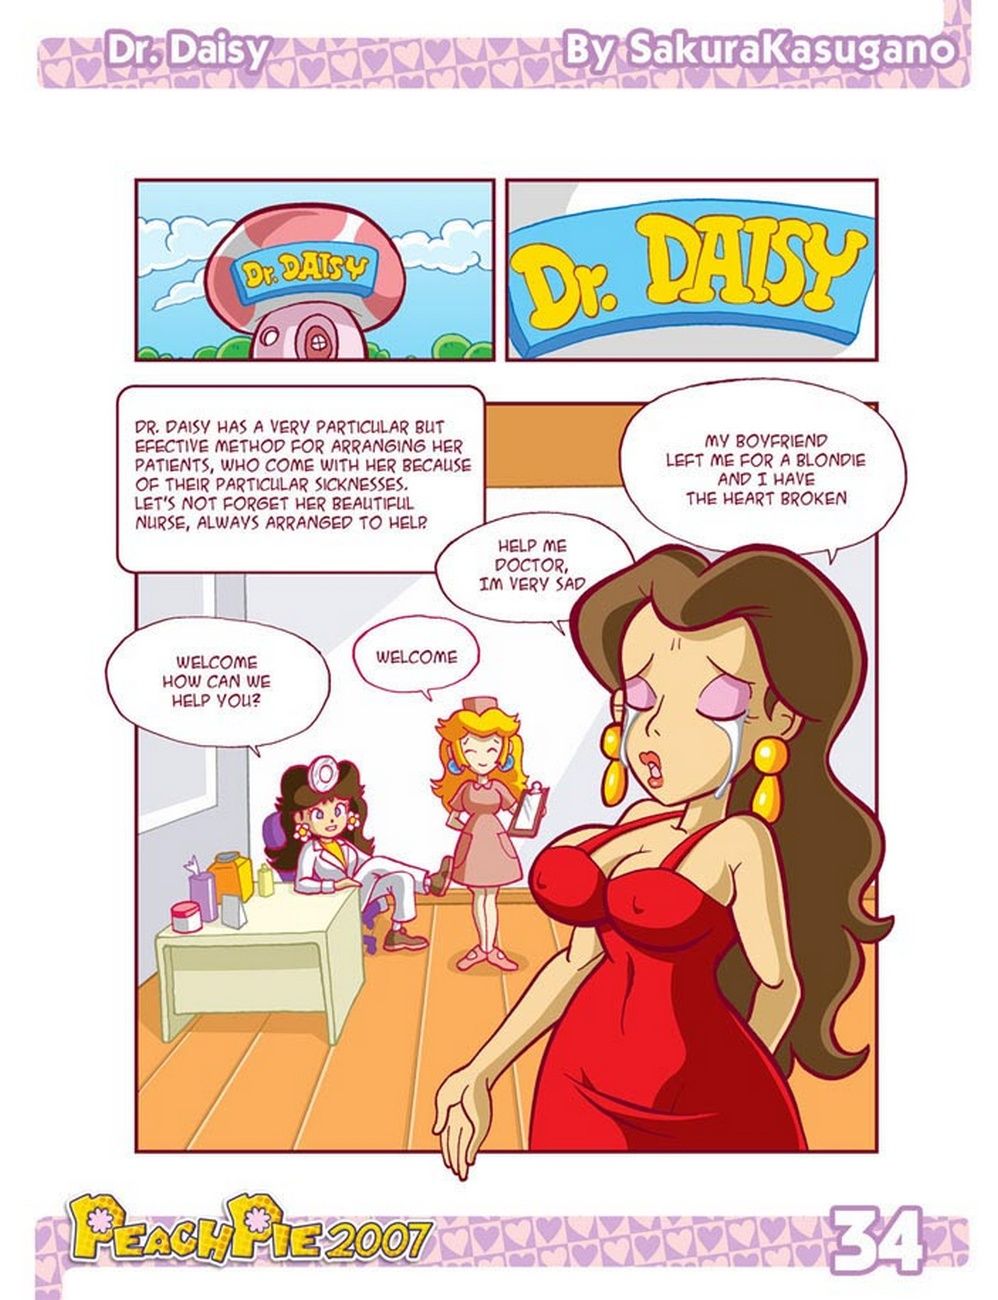 Dr. Daisy page 2